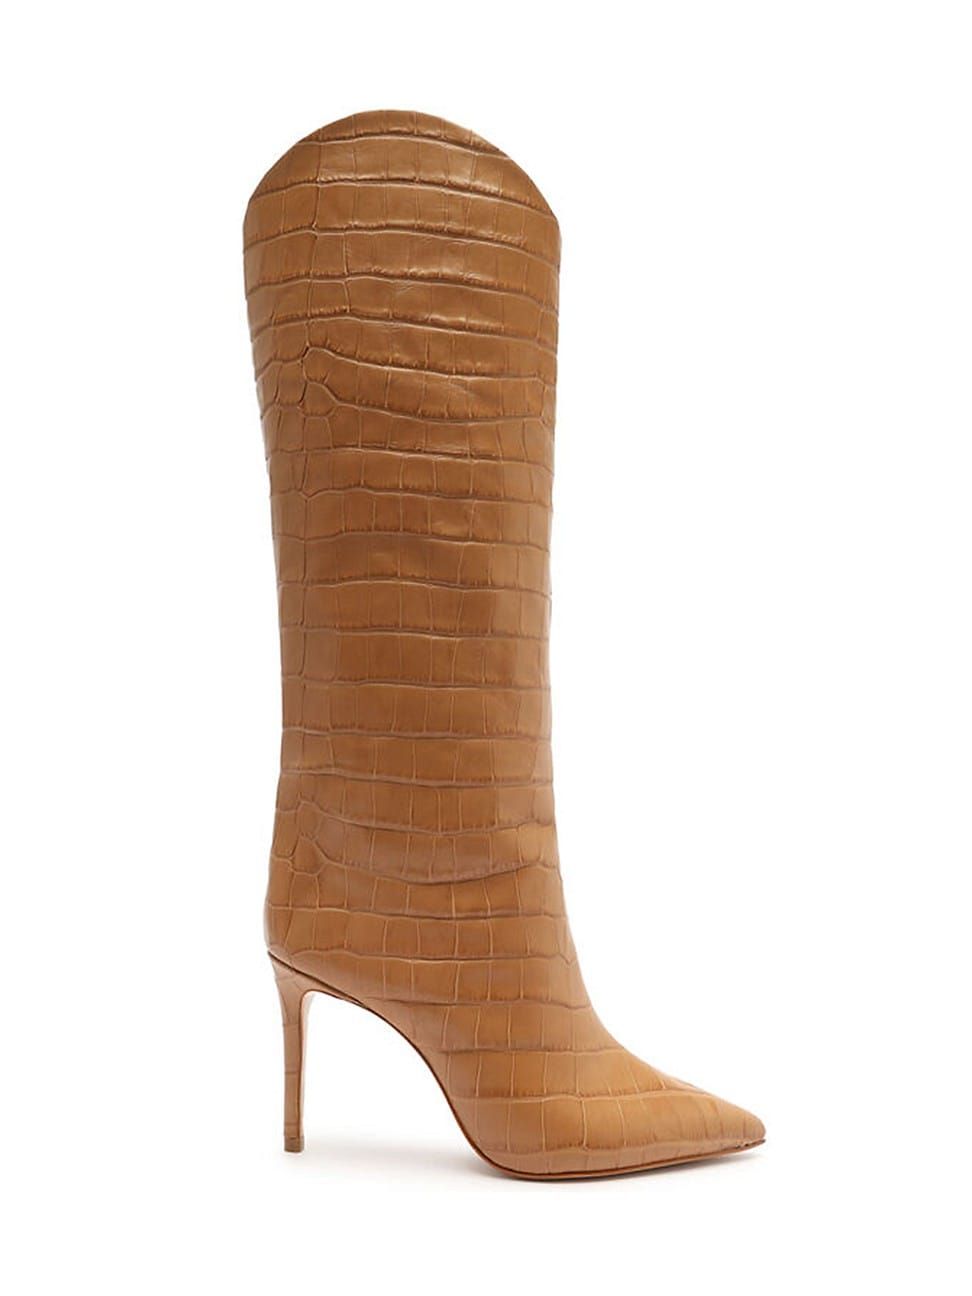 Women's Maryana Croc-Embossed Leather Knee-High Boot - Honeycomb - Size 10.5 - Honeycomb - Size 10.5 | Saks Fifth Avenue